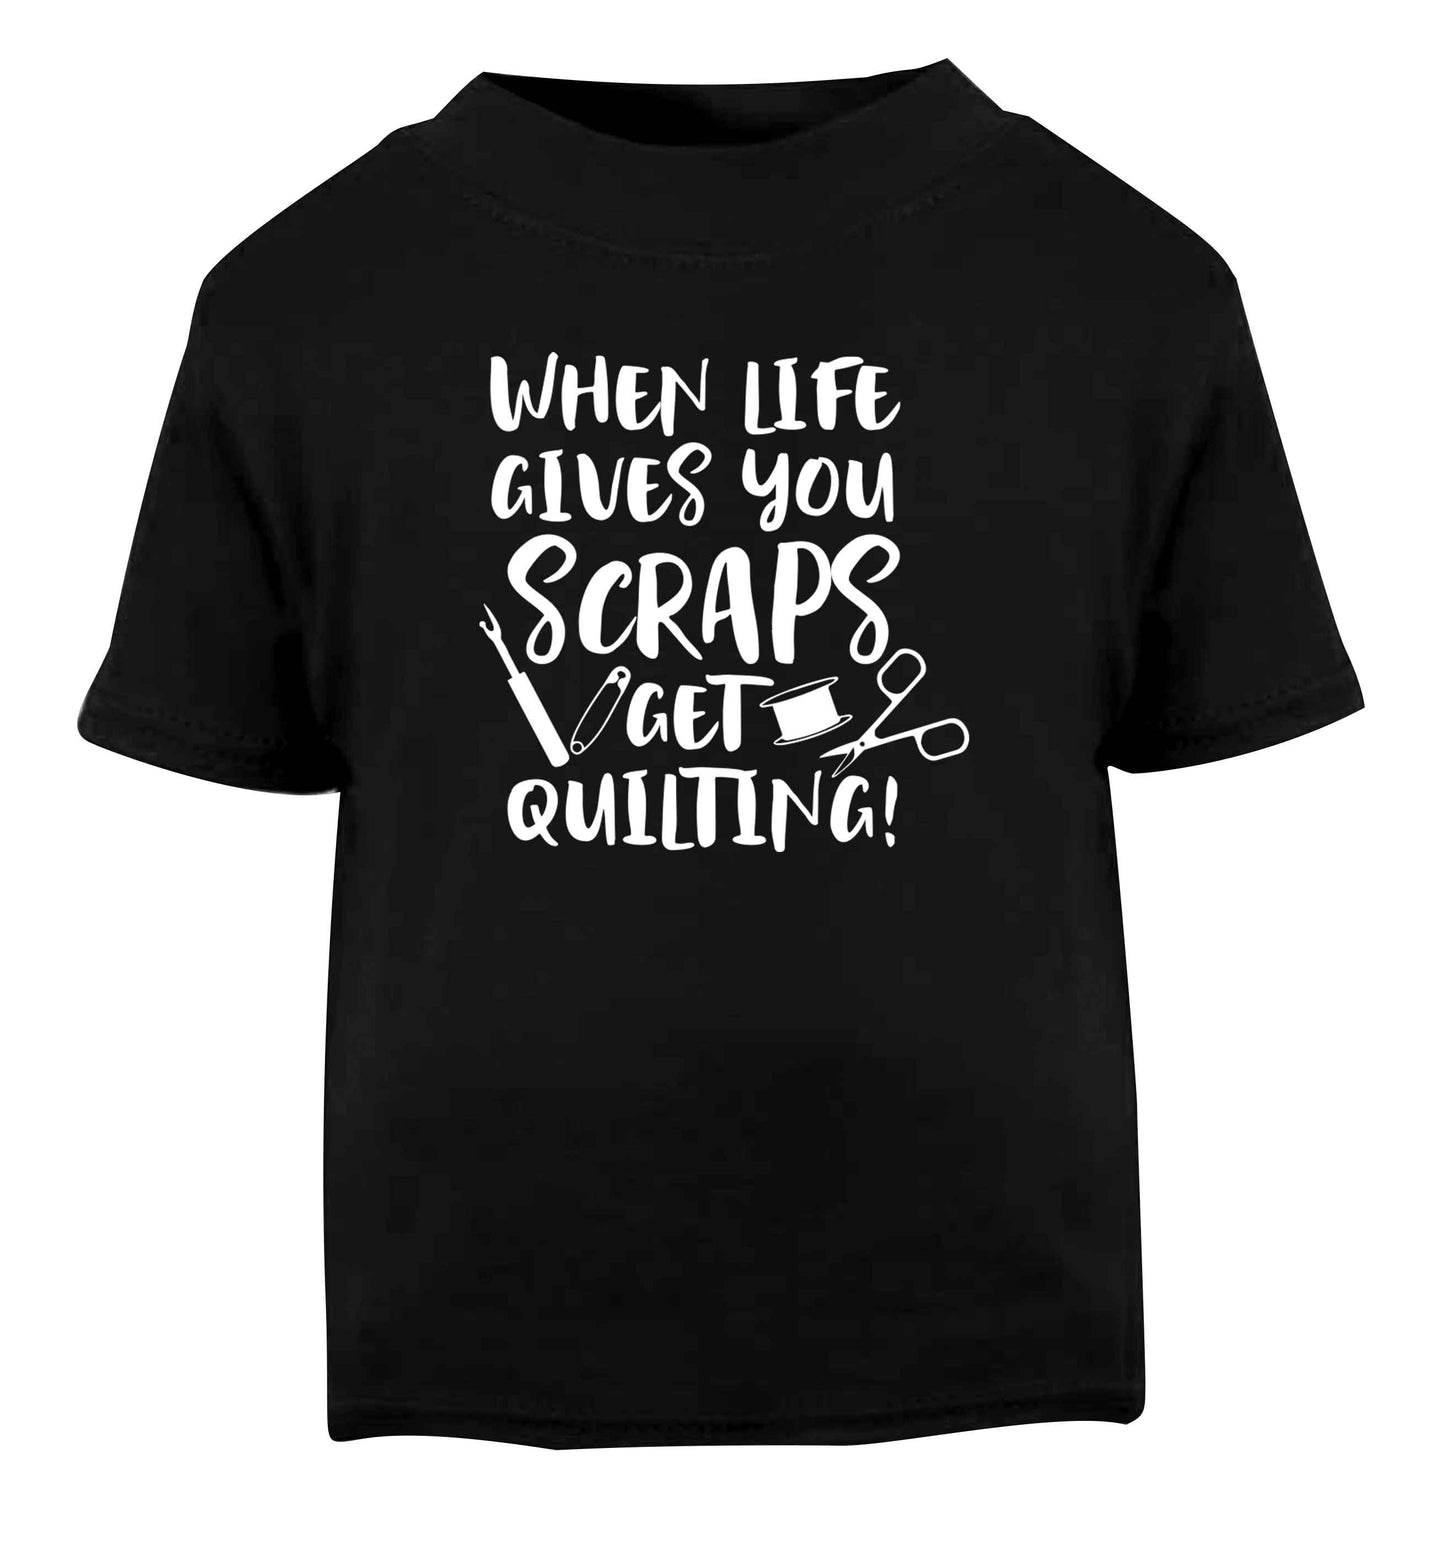 When life gives you scraps get quilting! Black Baby Toddler Tshirt 2 years